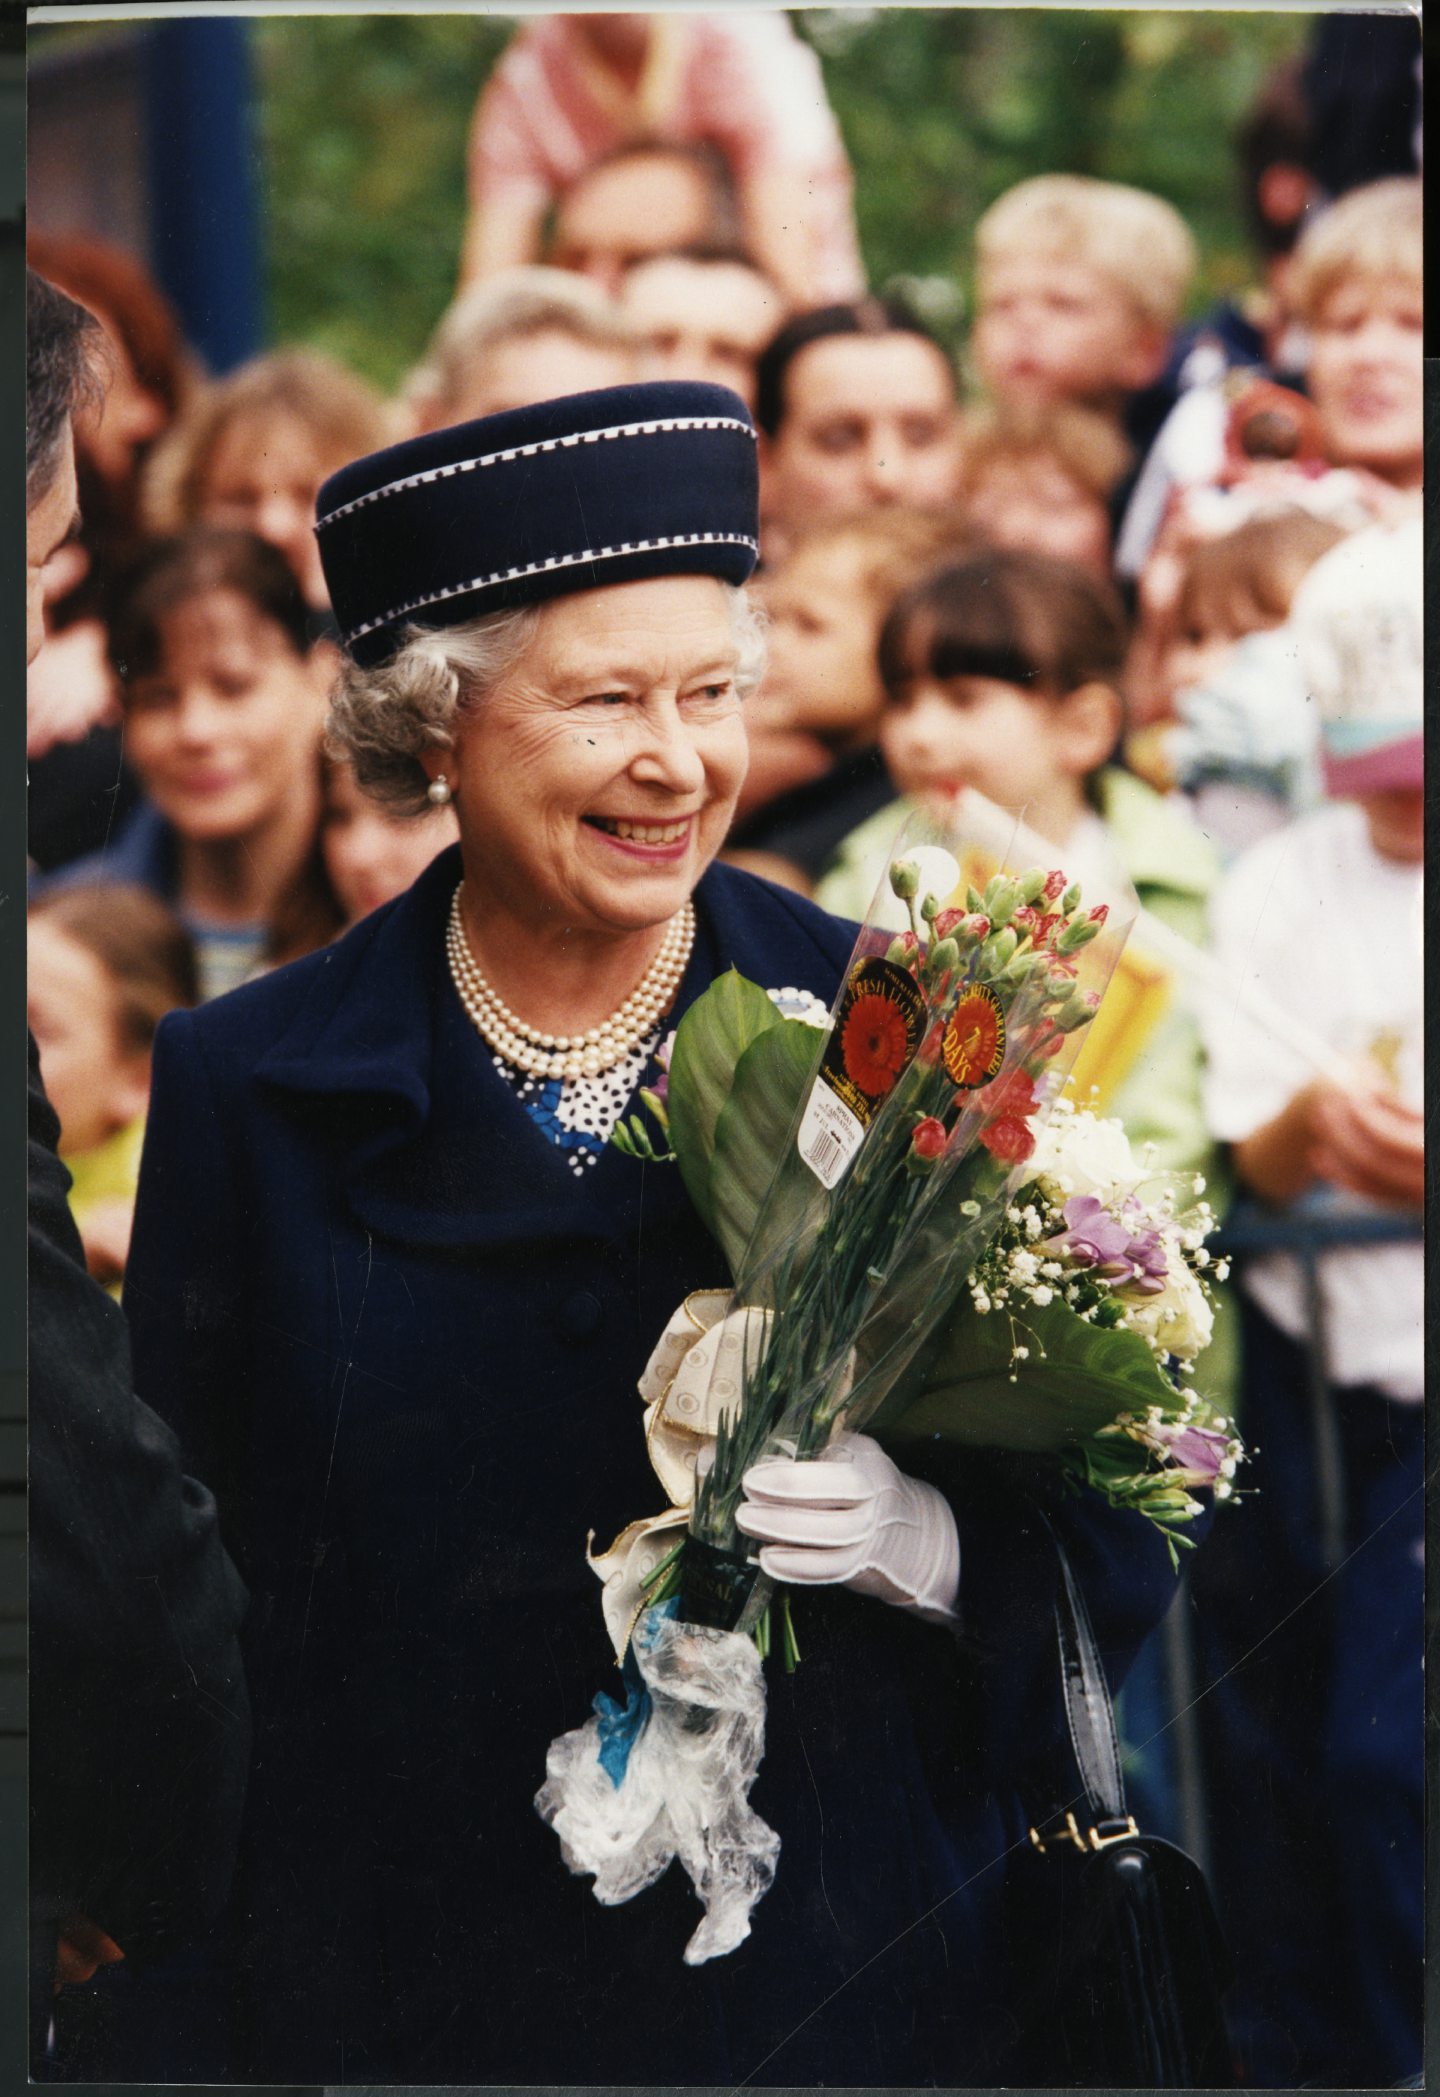 The Queen in Glenrothes.